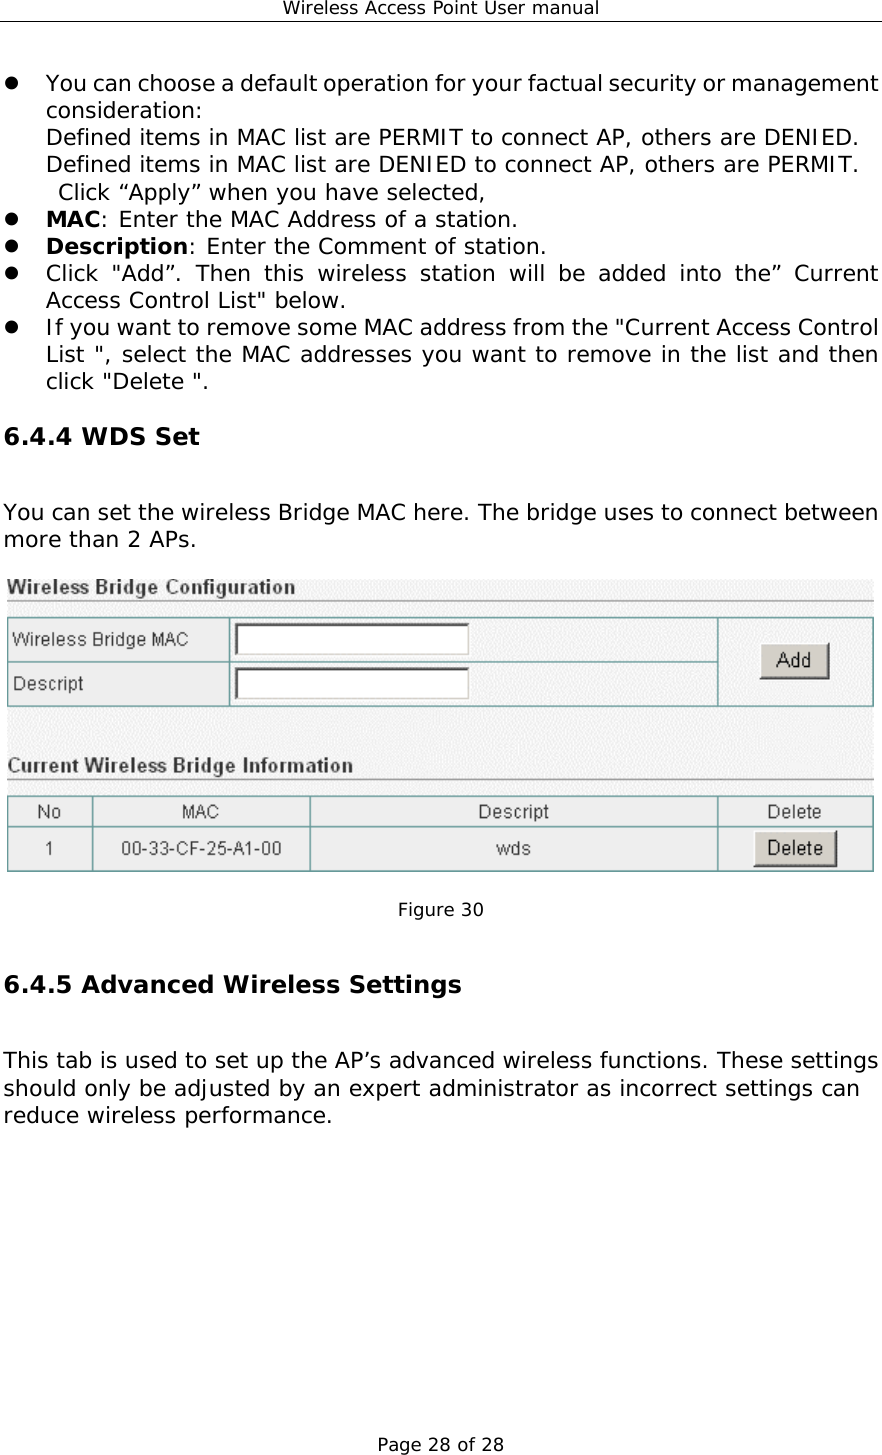 Wireless Access Point User manual Page 28 of 28   You can choose a default operation for your factual security or management consideration: Defined items in MAC list are PERMIT to connect AP, others are DENIED. Defined items in MAC list are DENIED to connect AP, others are PERMIT. Click “Apply” when you have selected,    MAC: Enter the MAC Address of a station.    Description: Enter the Comment of station.   Click &quot;Add”. Then this wireless station will be added into the” Current Access Control List&quot; below.   If you want to remove some MAC address from the &quot;Current Access Control List &quot;, select the MAC addresses you want to remove in the list and then click &quot;Delete &quot;. 6.4.4 WDS Set You can set the wireless Bridge MAC here. The bridge uses to connect between more than 2 APs.    Figure 30  6.4.5 Advanced Wireless Settings This tab is used to set up the AP’s advanced wireless functions. These settings should only be adjusted by an expert administrator as incorrect settings can reduce wireless performance.  